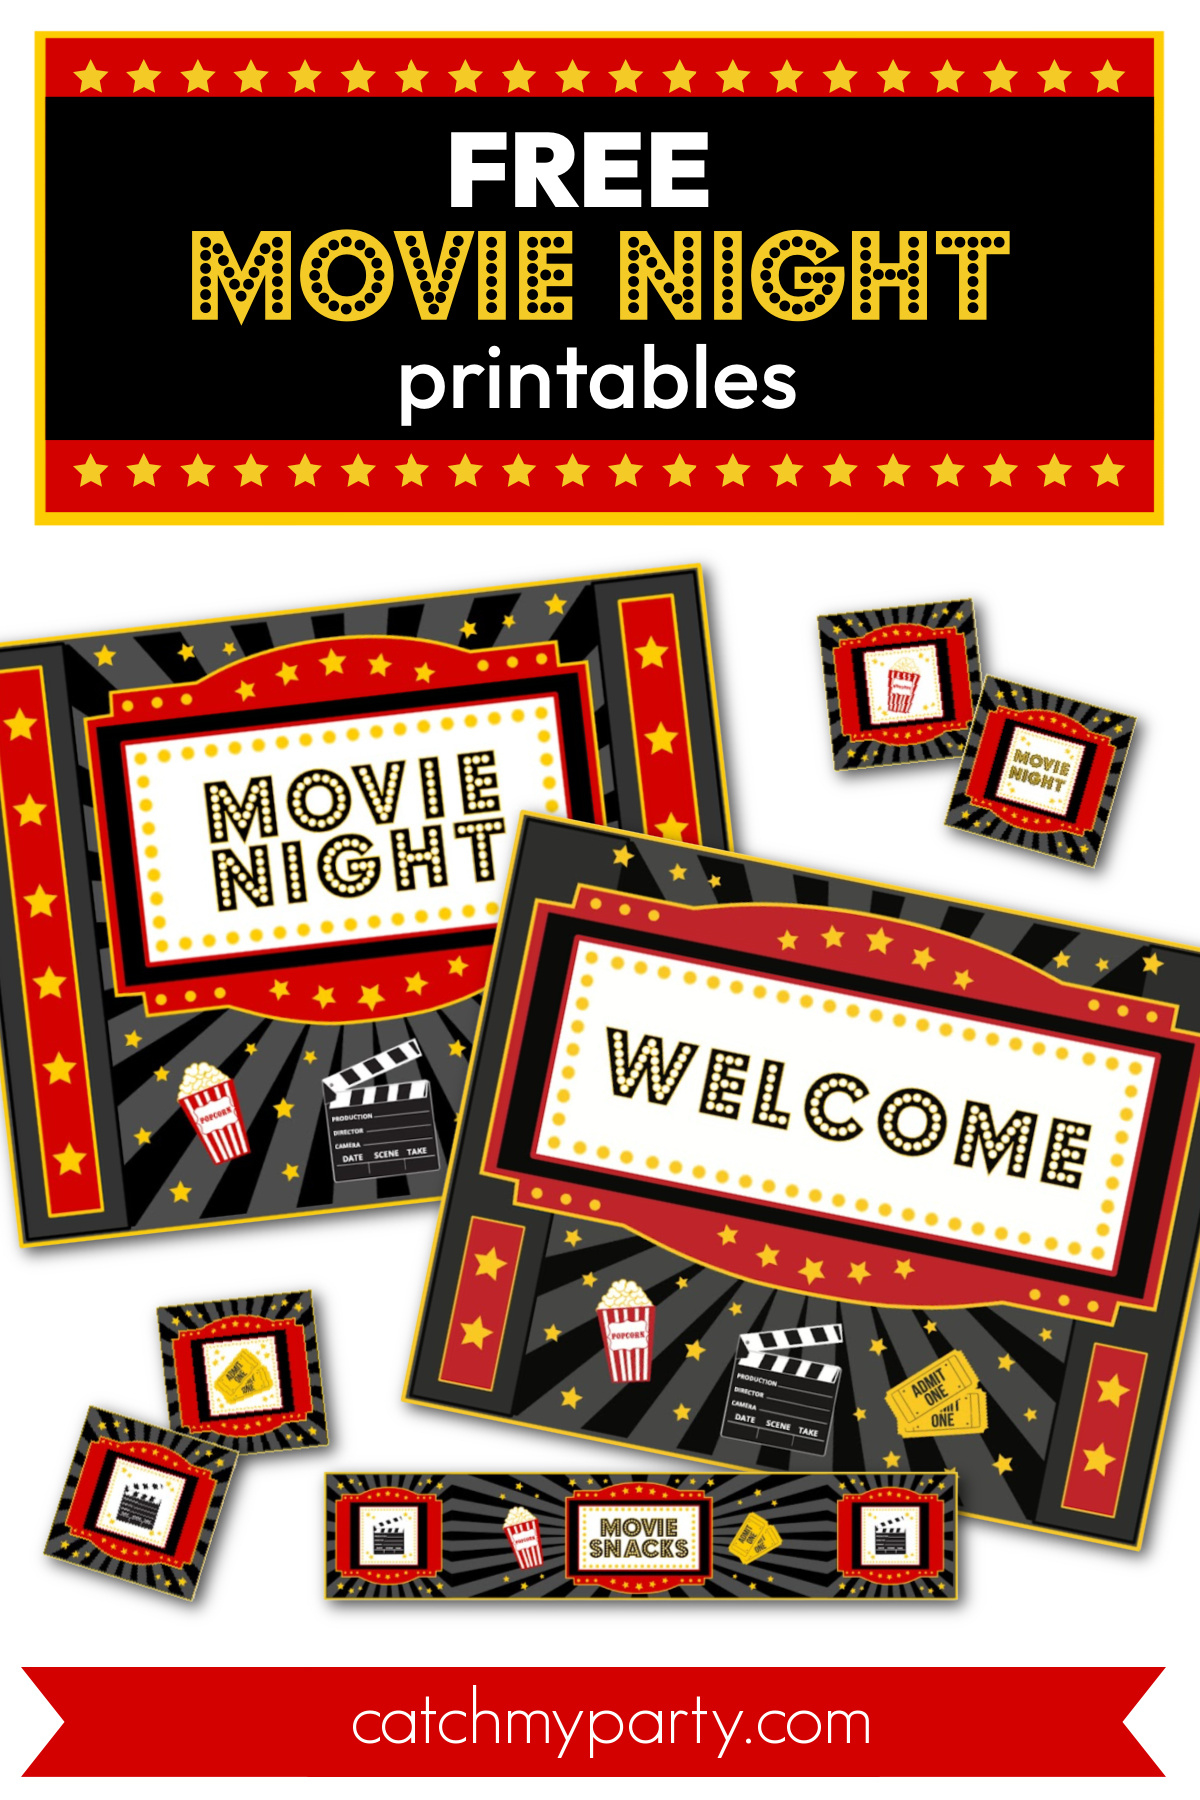 Free Printables To Level Up Your Movie Night! | Catch My Party regarding Free Movie Night Printables